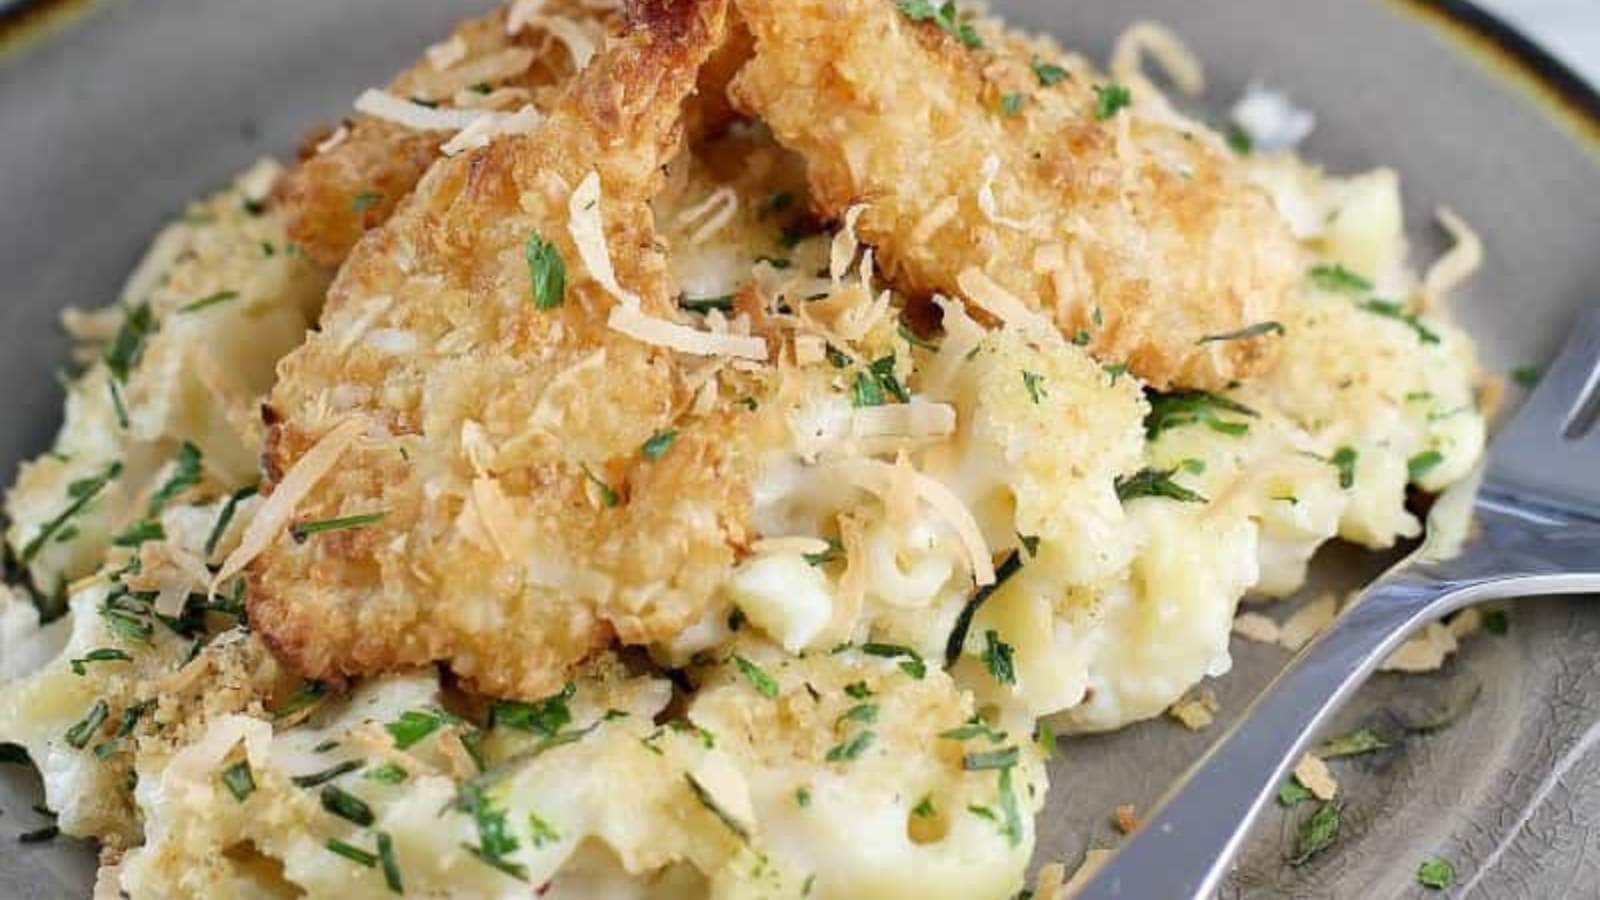 Coconut Shrimp Macaroni and Cheese recipe by Ericas Recipes.